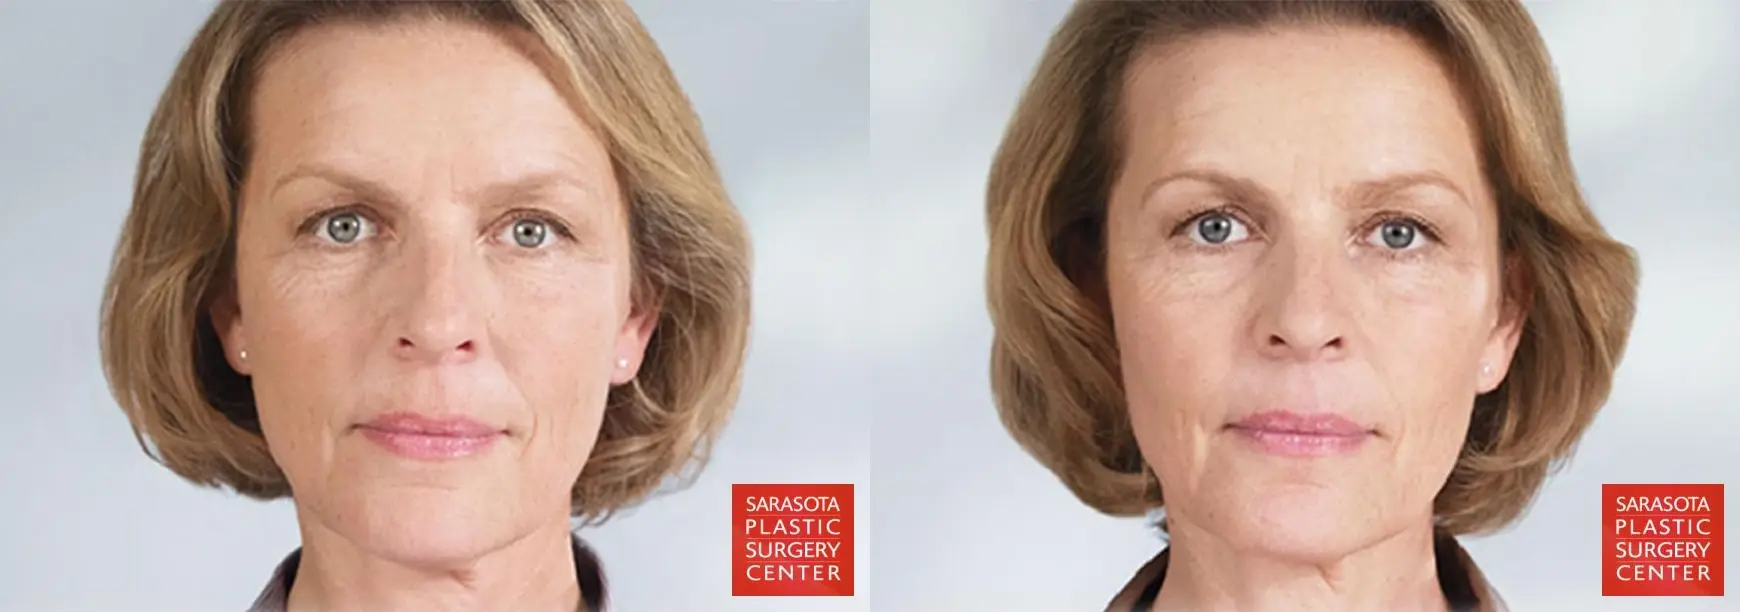 Sculptra®: Patient 1 - Before and After 2